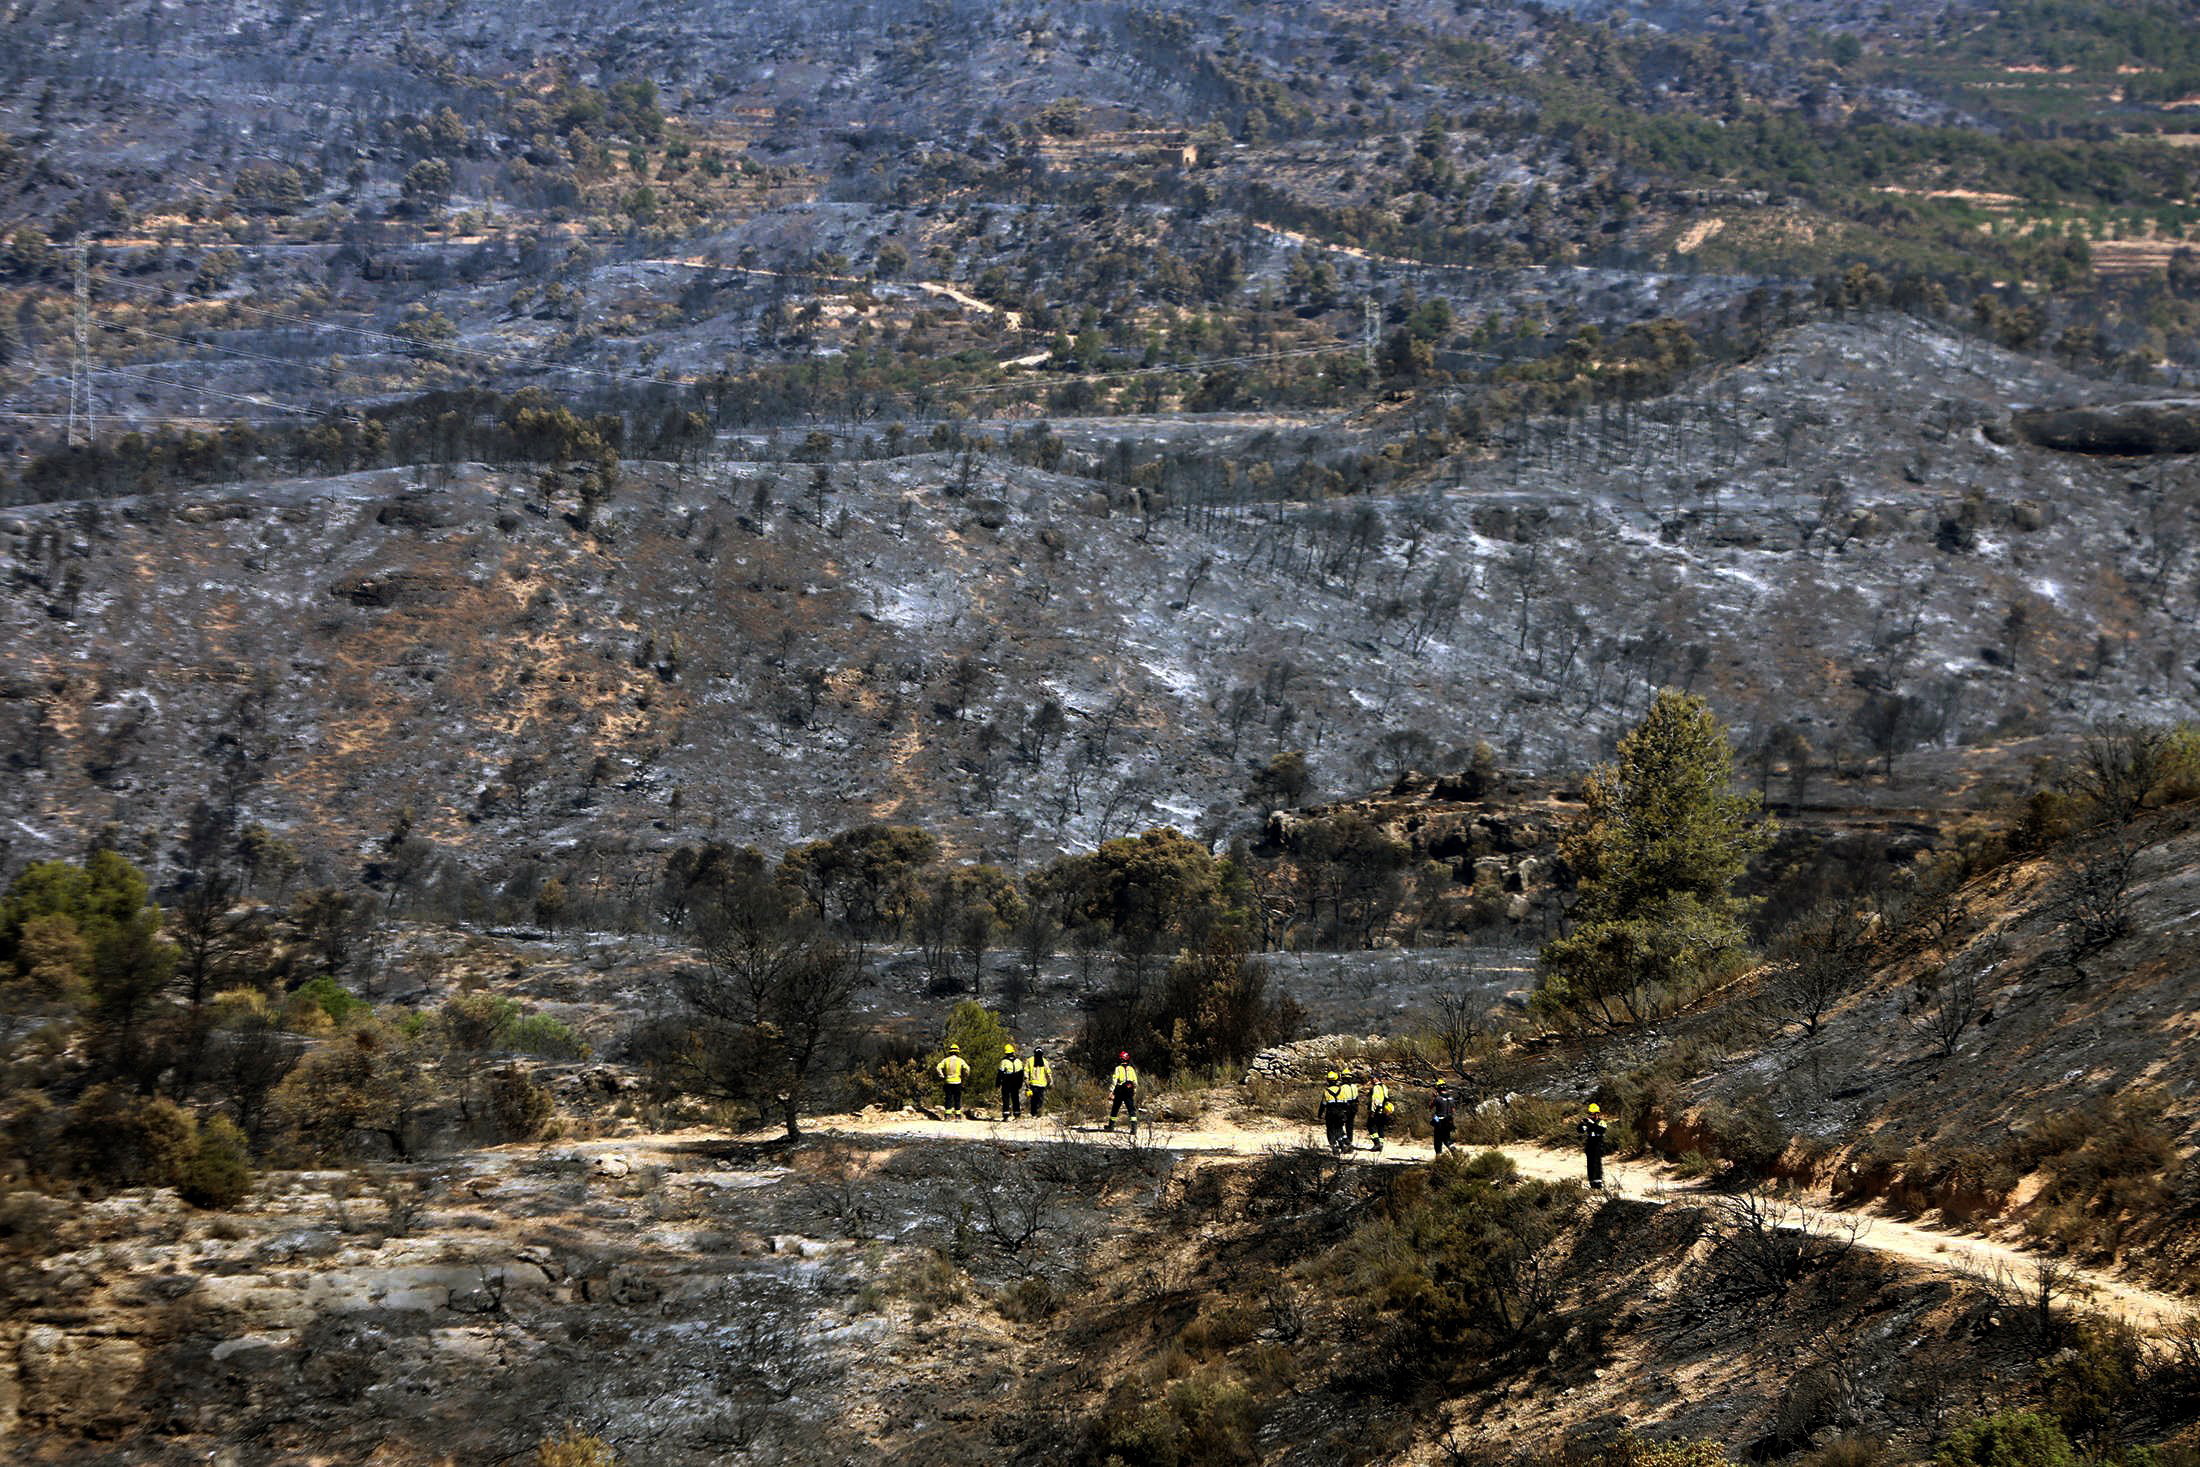 epa07682663 Firefighters inspect burnt land in Ribera d'Ebre, Tarragona, Catalonia, Spain, while the forest fire continues active in the area for four consecutive days, 29 June 2019. The forest fire, declared 26 June 2019 in Tarragona, has already burnt thousands of hectares of land reaching the province of Lleida.  EPA/JAUME SERRAT